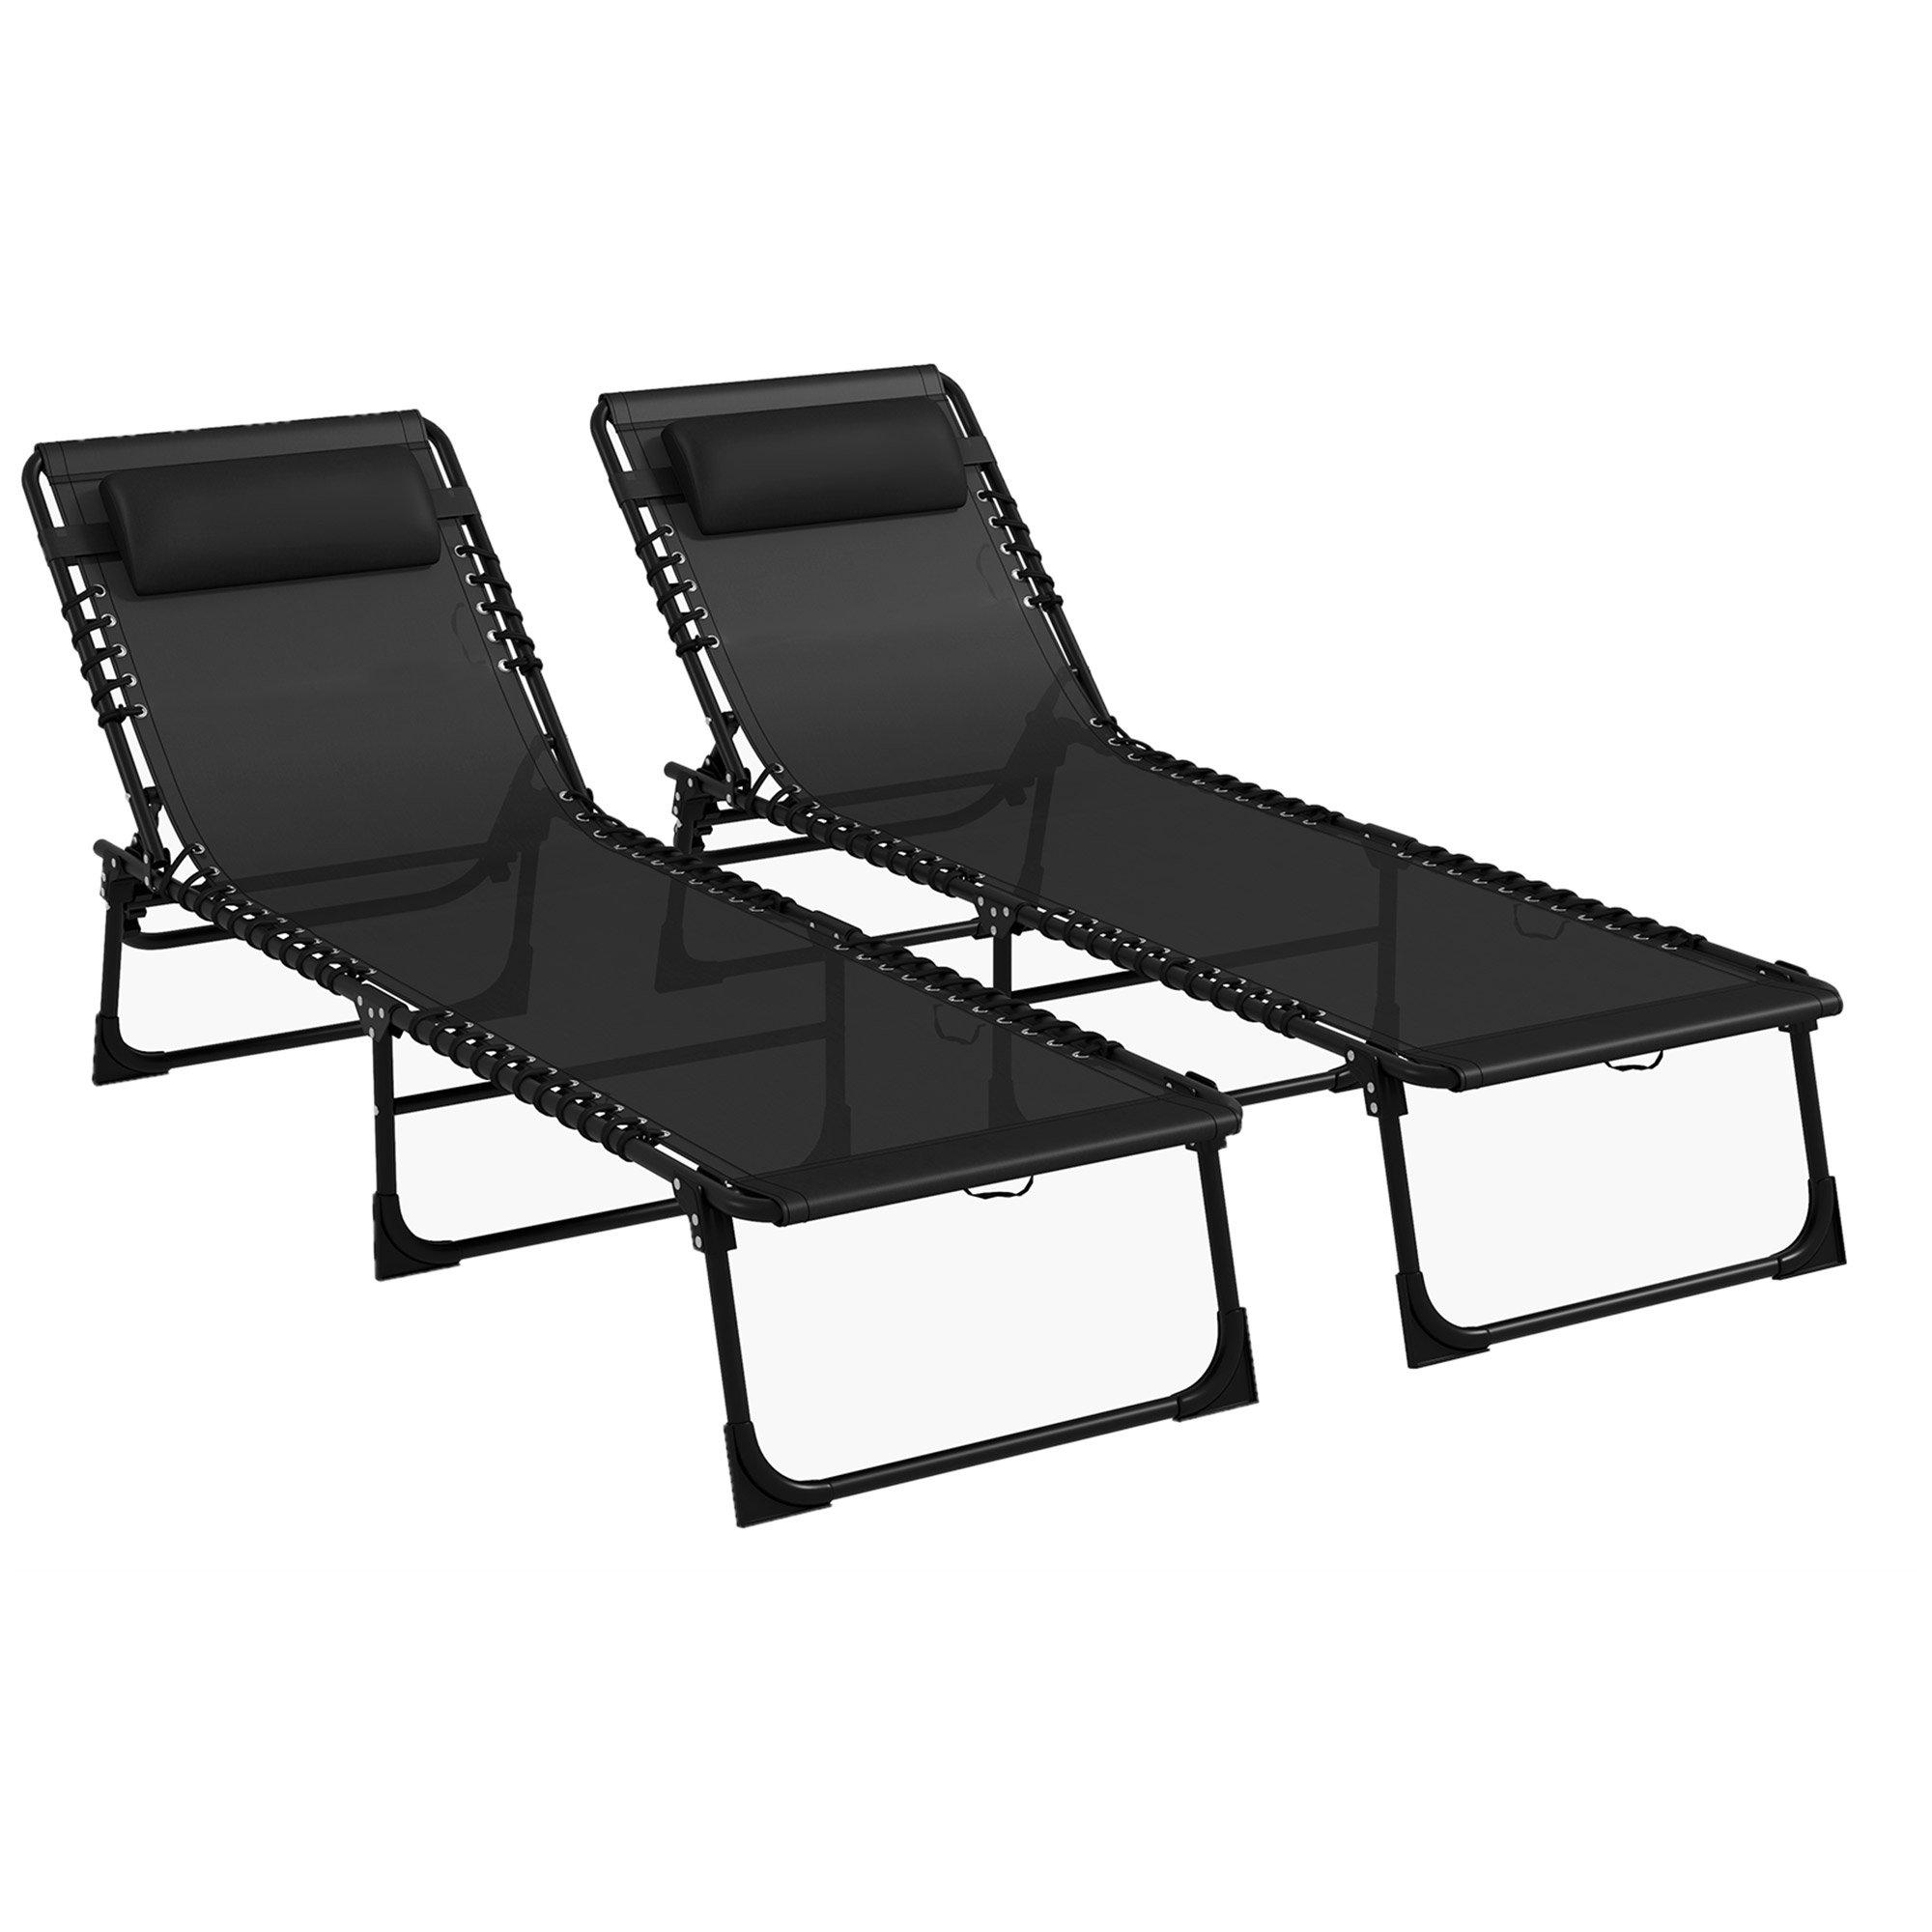 2 Pcs Folding Beach Chair Chaise Lounge 4 Adjustable Positions